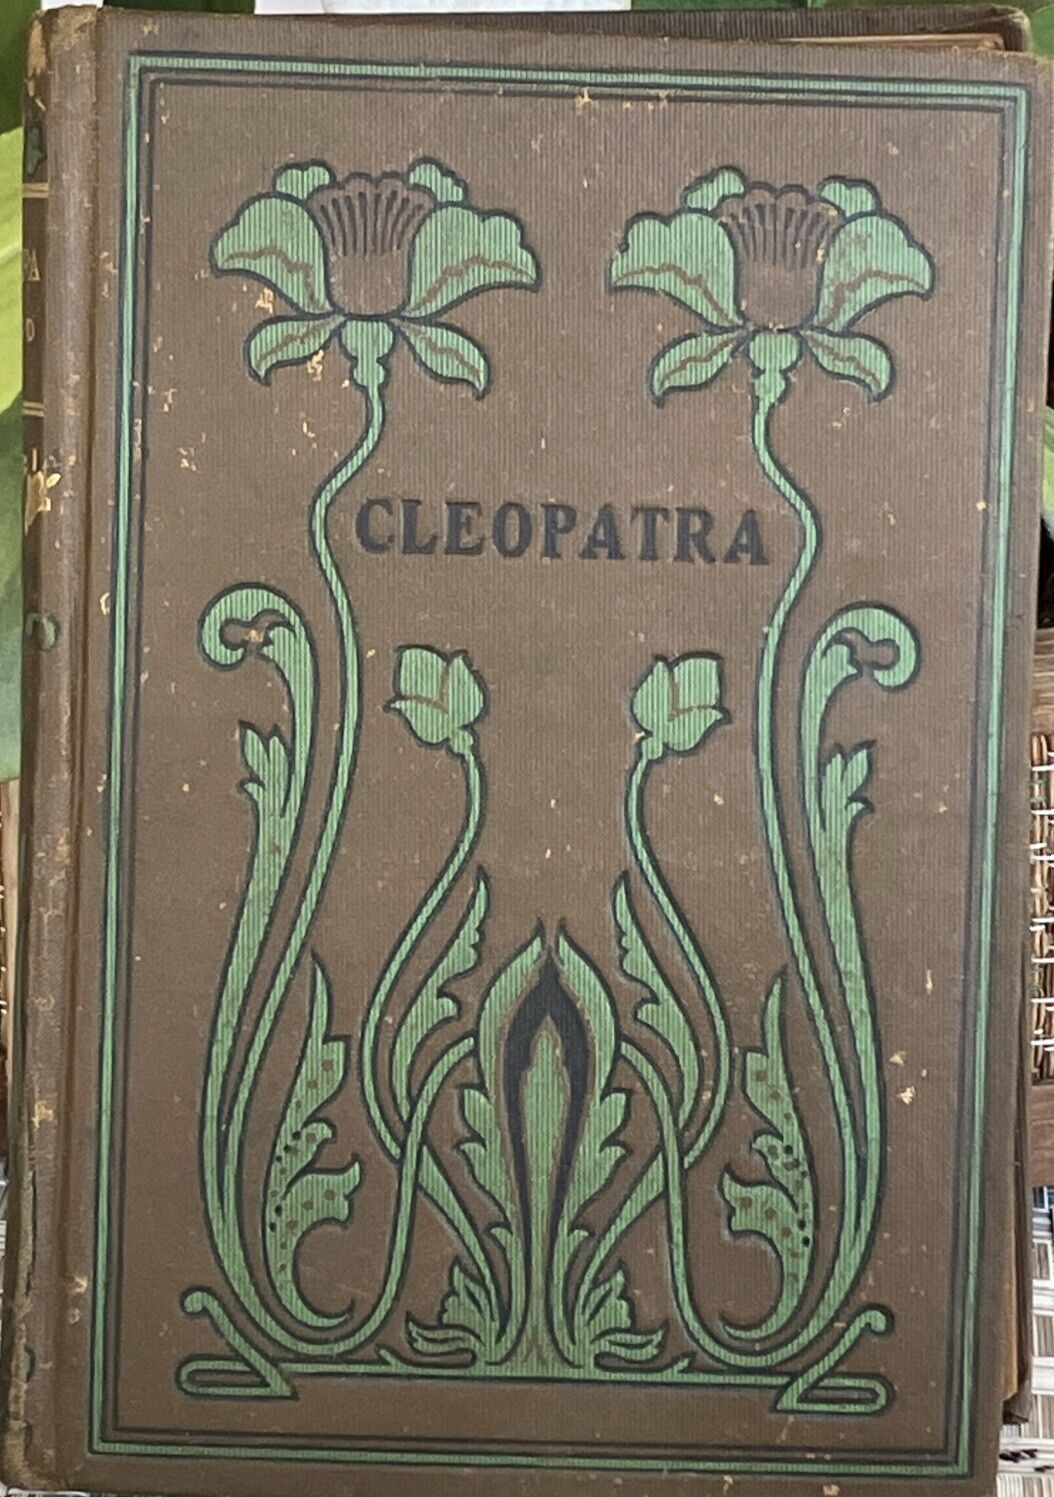 Rare Antique “Cleopatra”By H. Rider Haggard First Edition